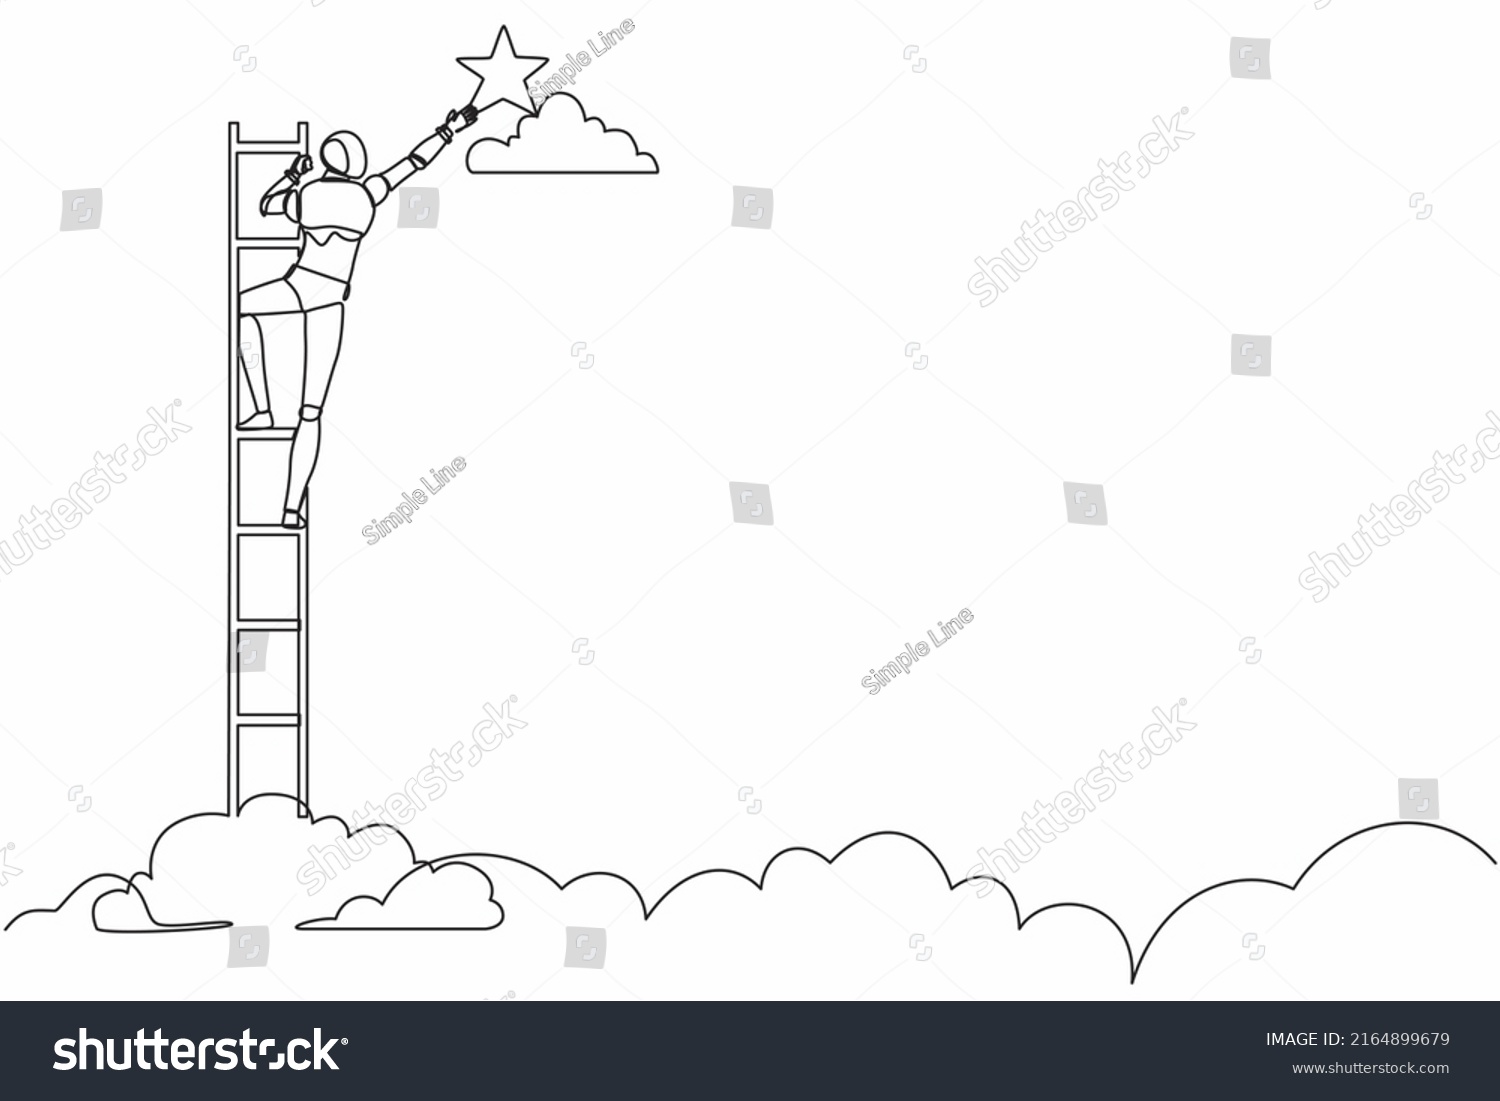 Continuous One Line Drawing Robot Standing Stock Vector (Royalty Free ...